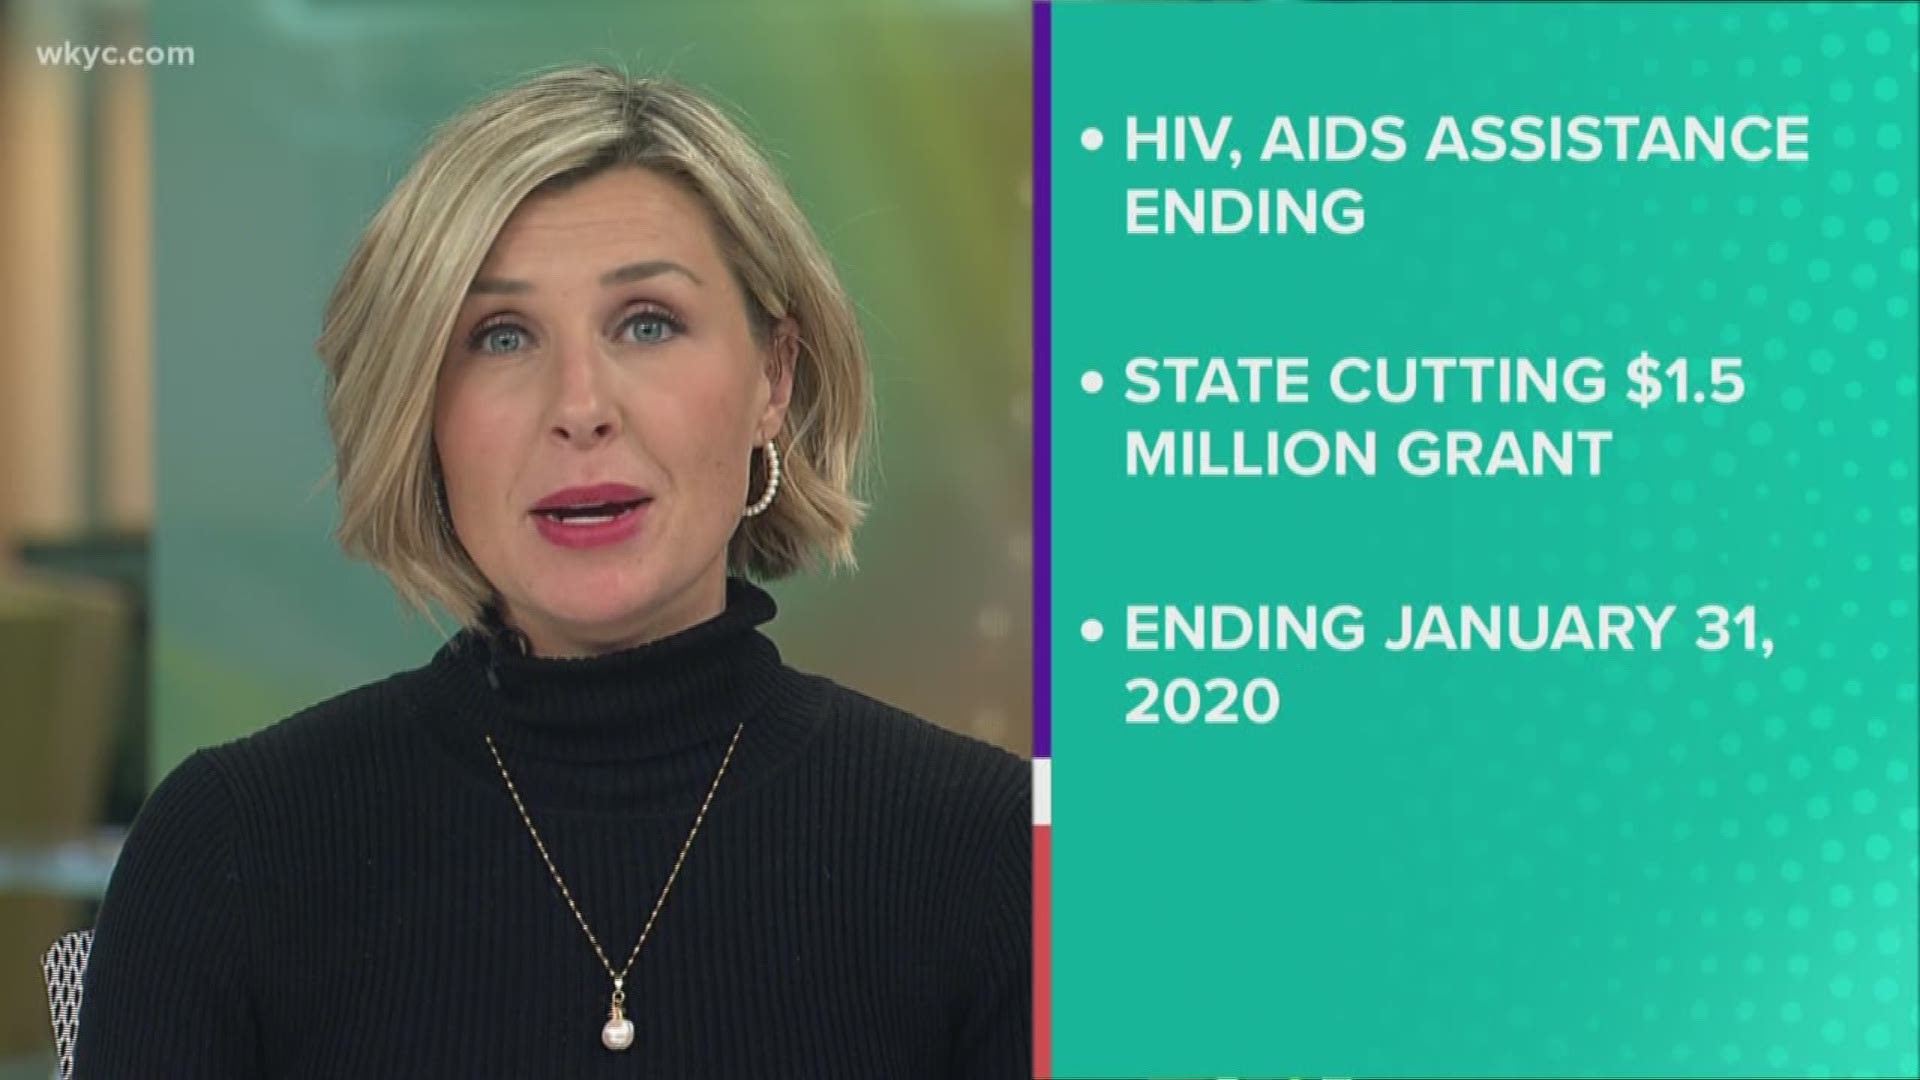 The grant was dedicated to educating and assisting the public in the prevention and spread of HIV/AIDS. It will end on January 21, 2020.